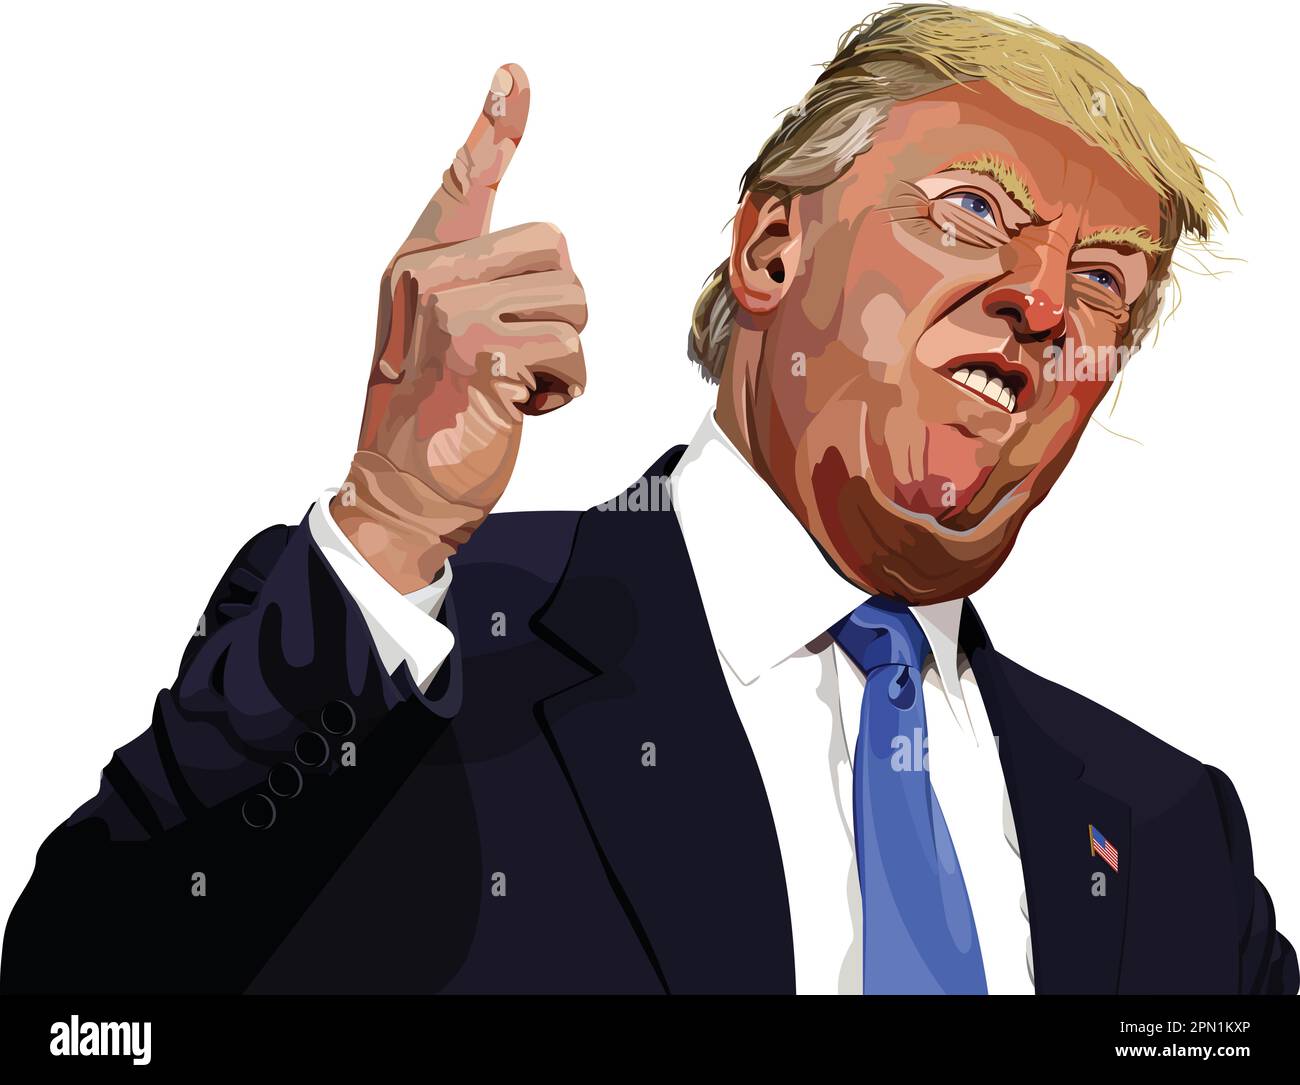 Donald Trump looking angry and animated pointing his finger. Stylised vector illustration Stock Vector